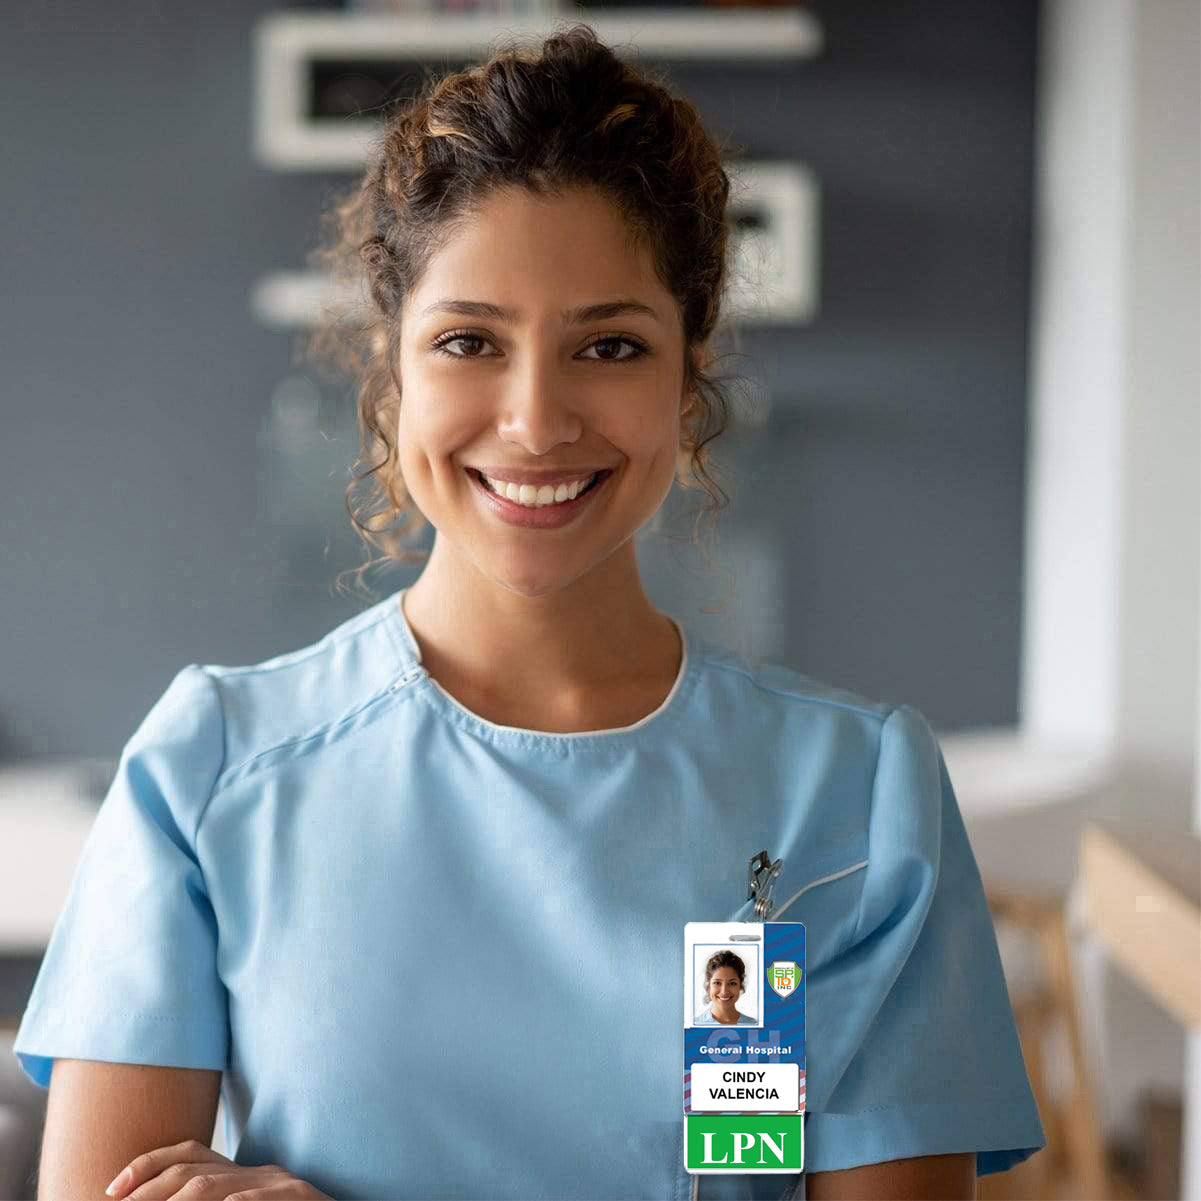 "LPN" Vertical Badge Buddy with Green Border